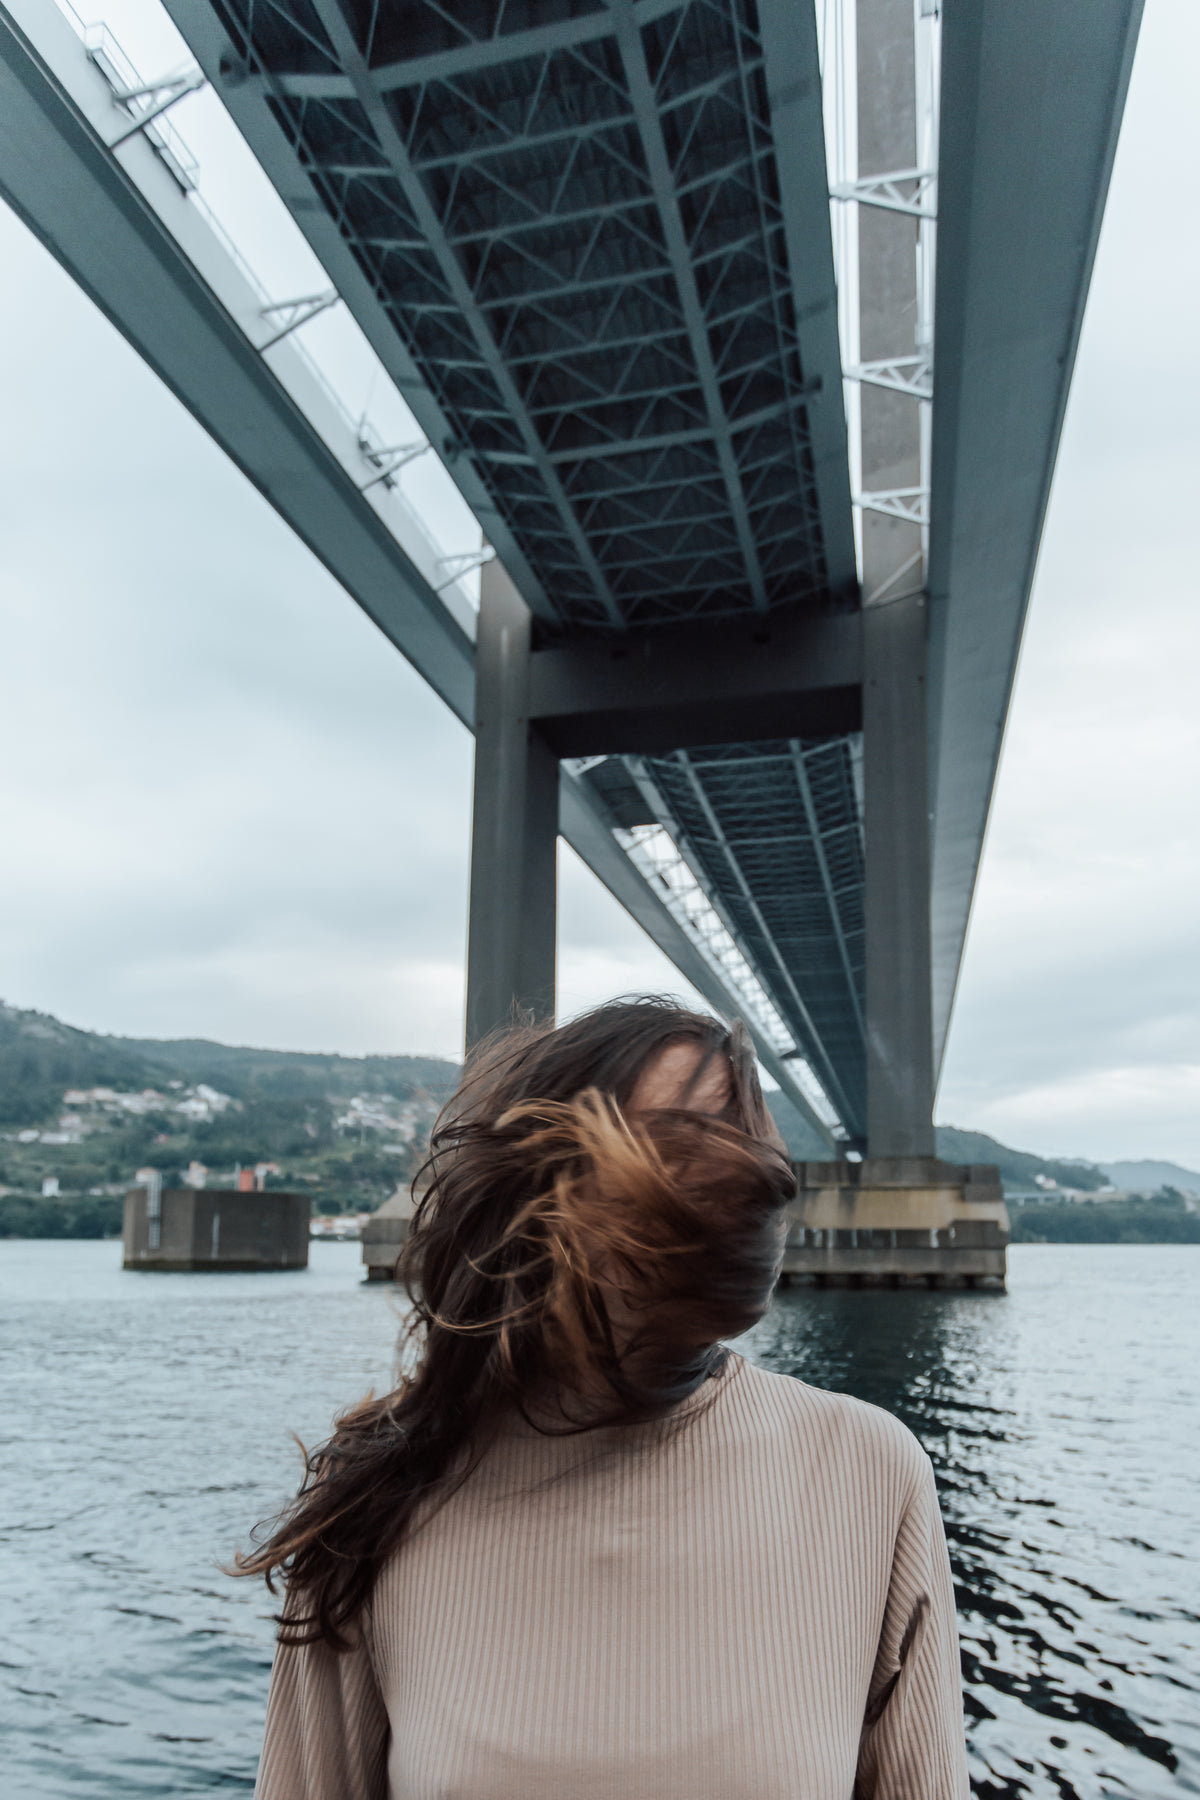 person covered by hair stands under bridge on a windy day